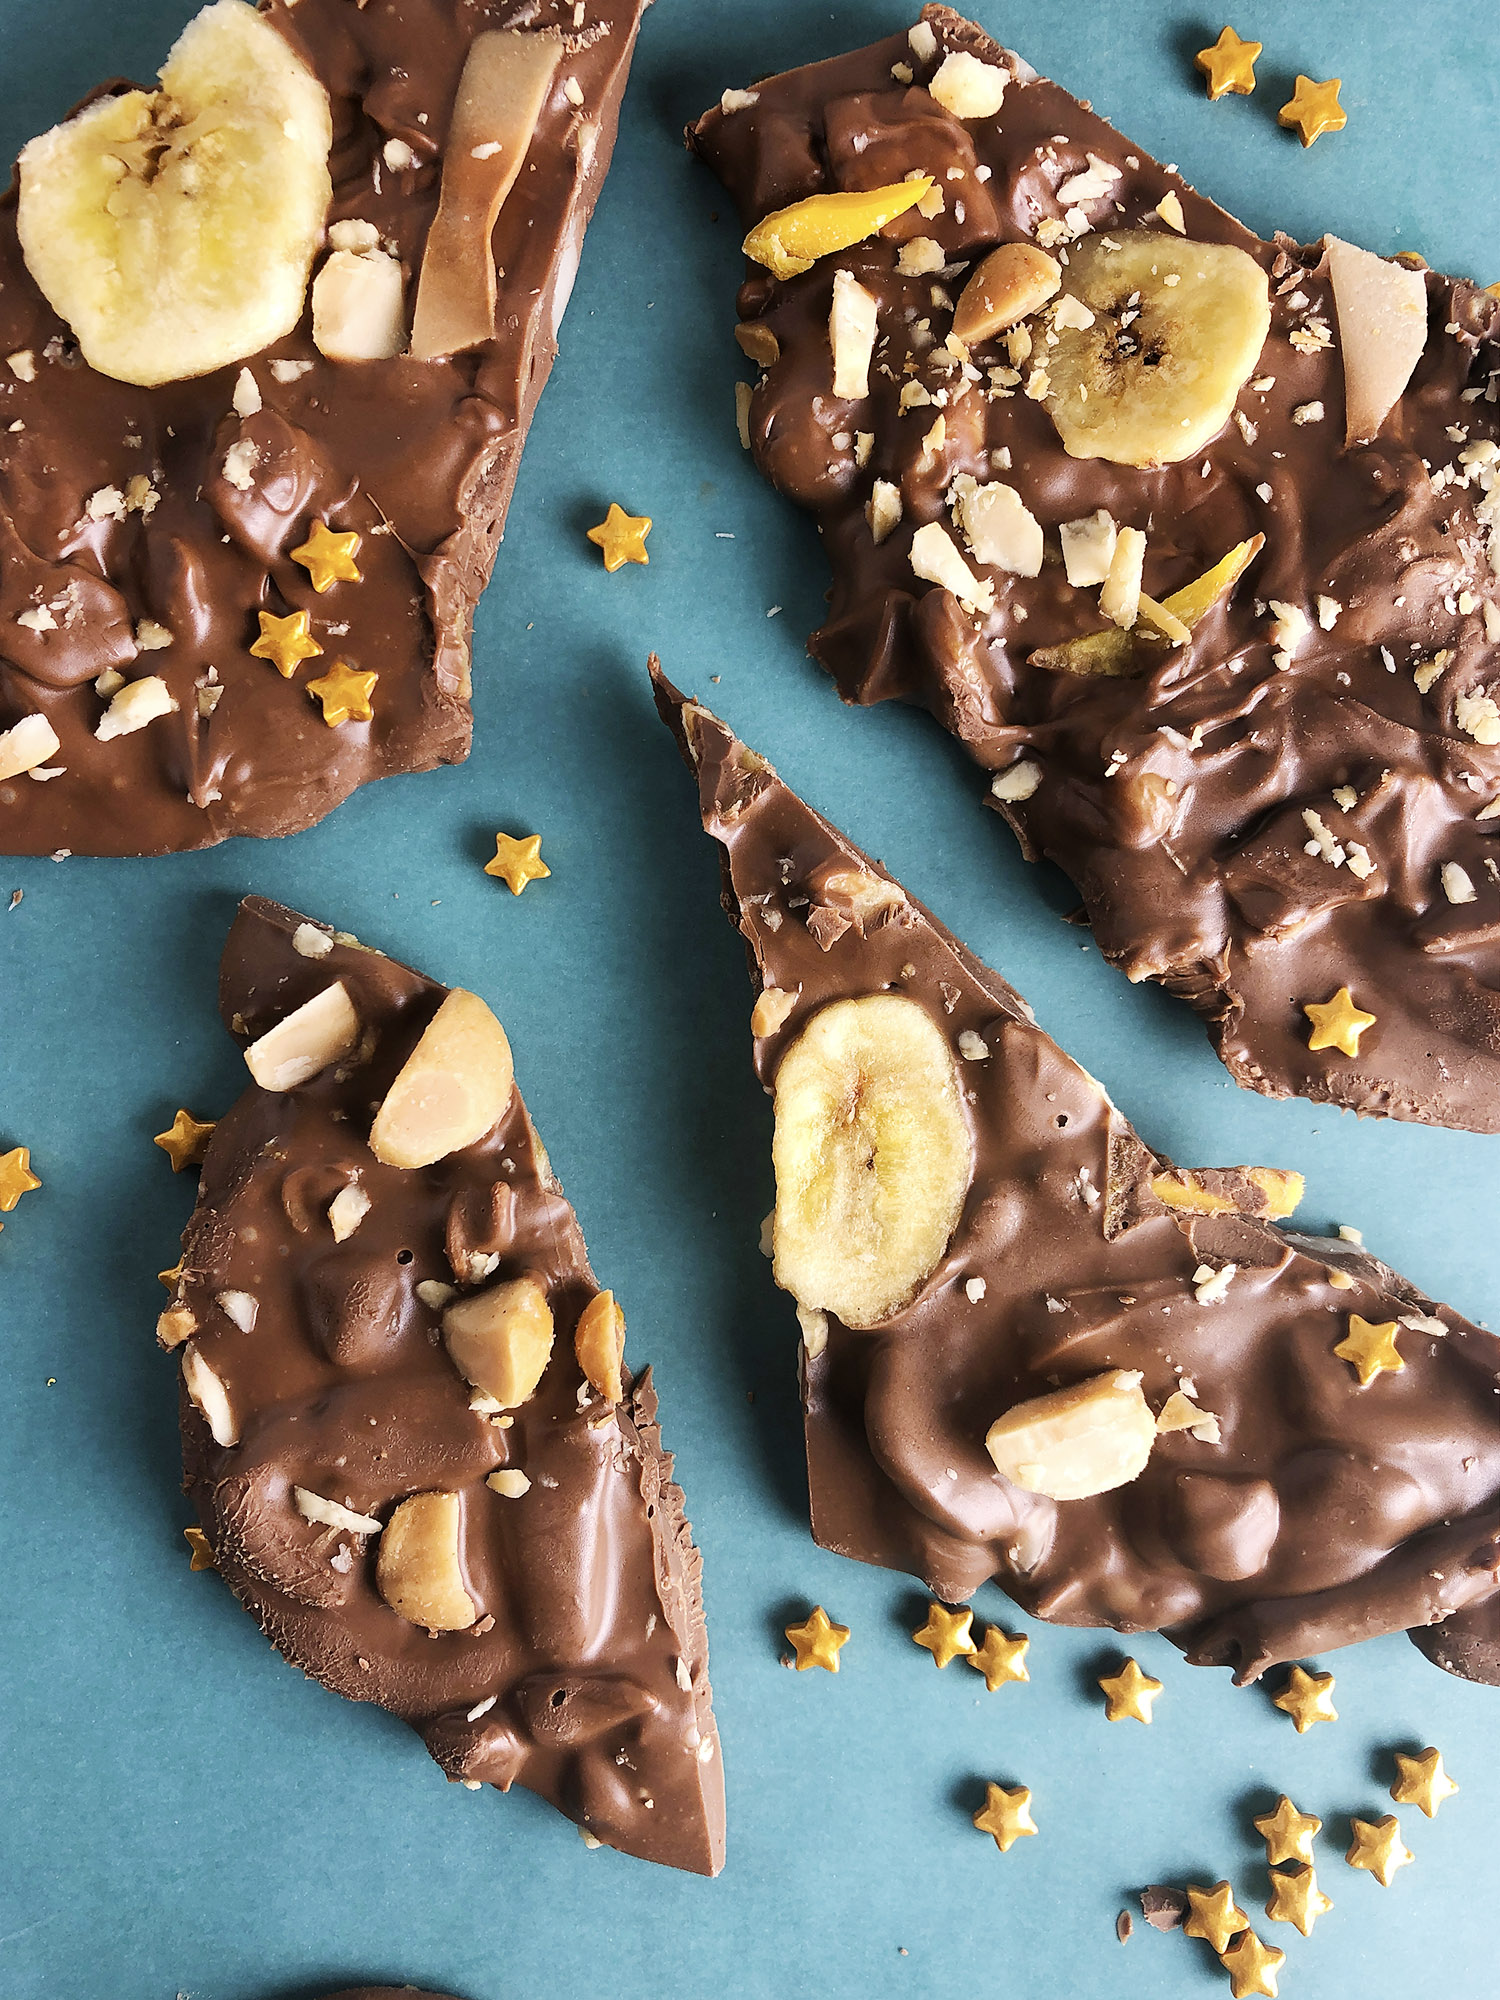 Top-down view of milk chocolate bark with dried mango, banana chips, macadamia nuts, and toasted coconut